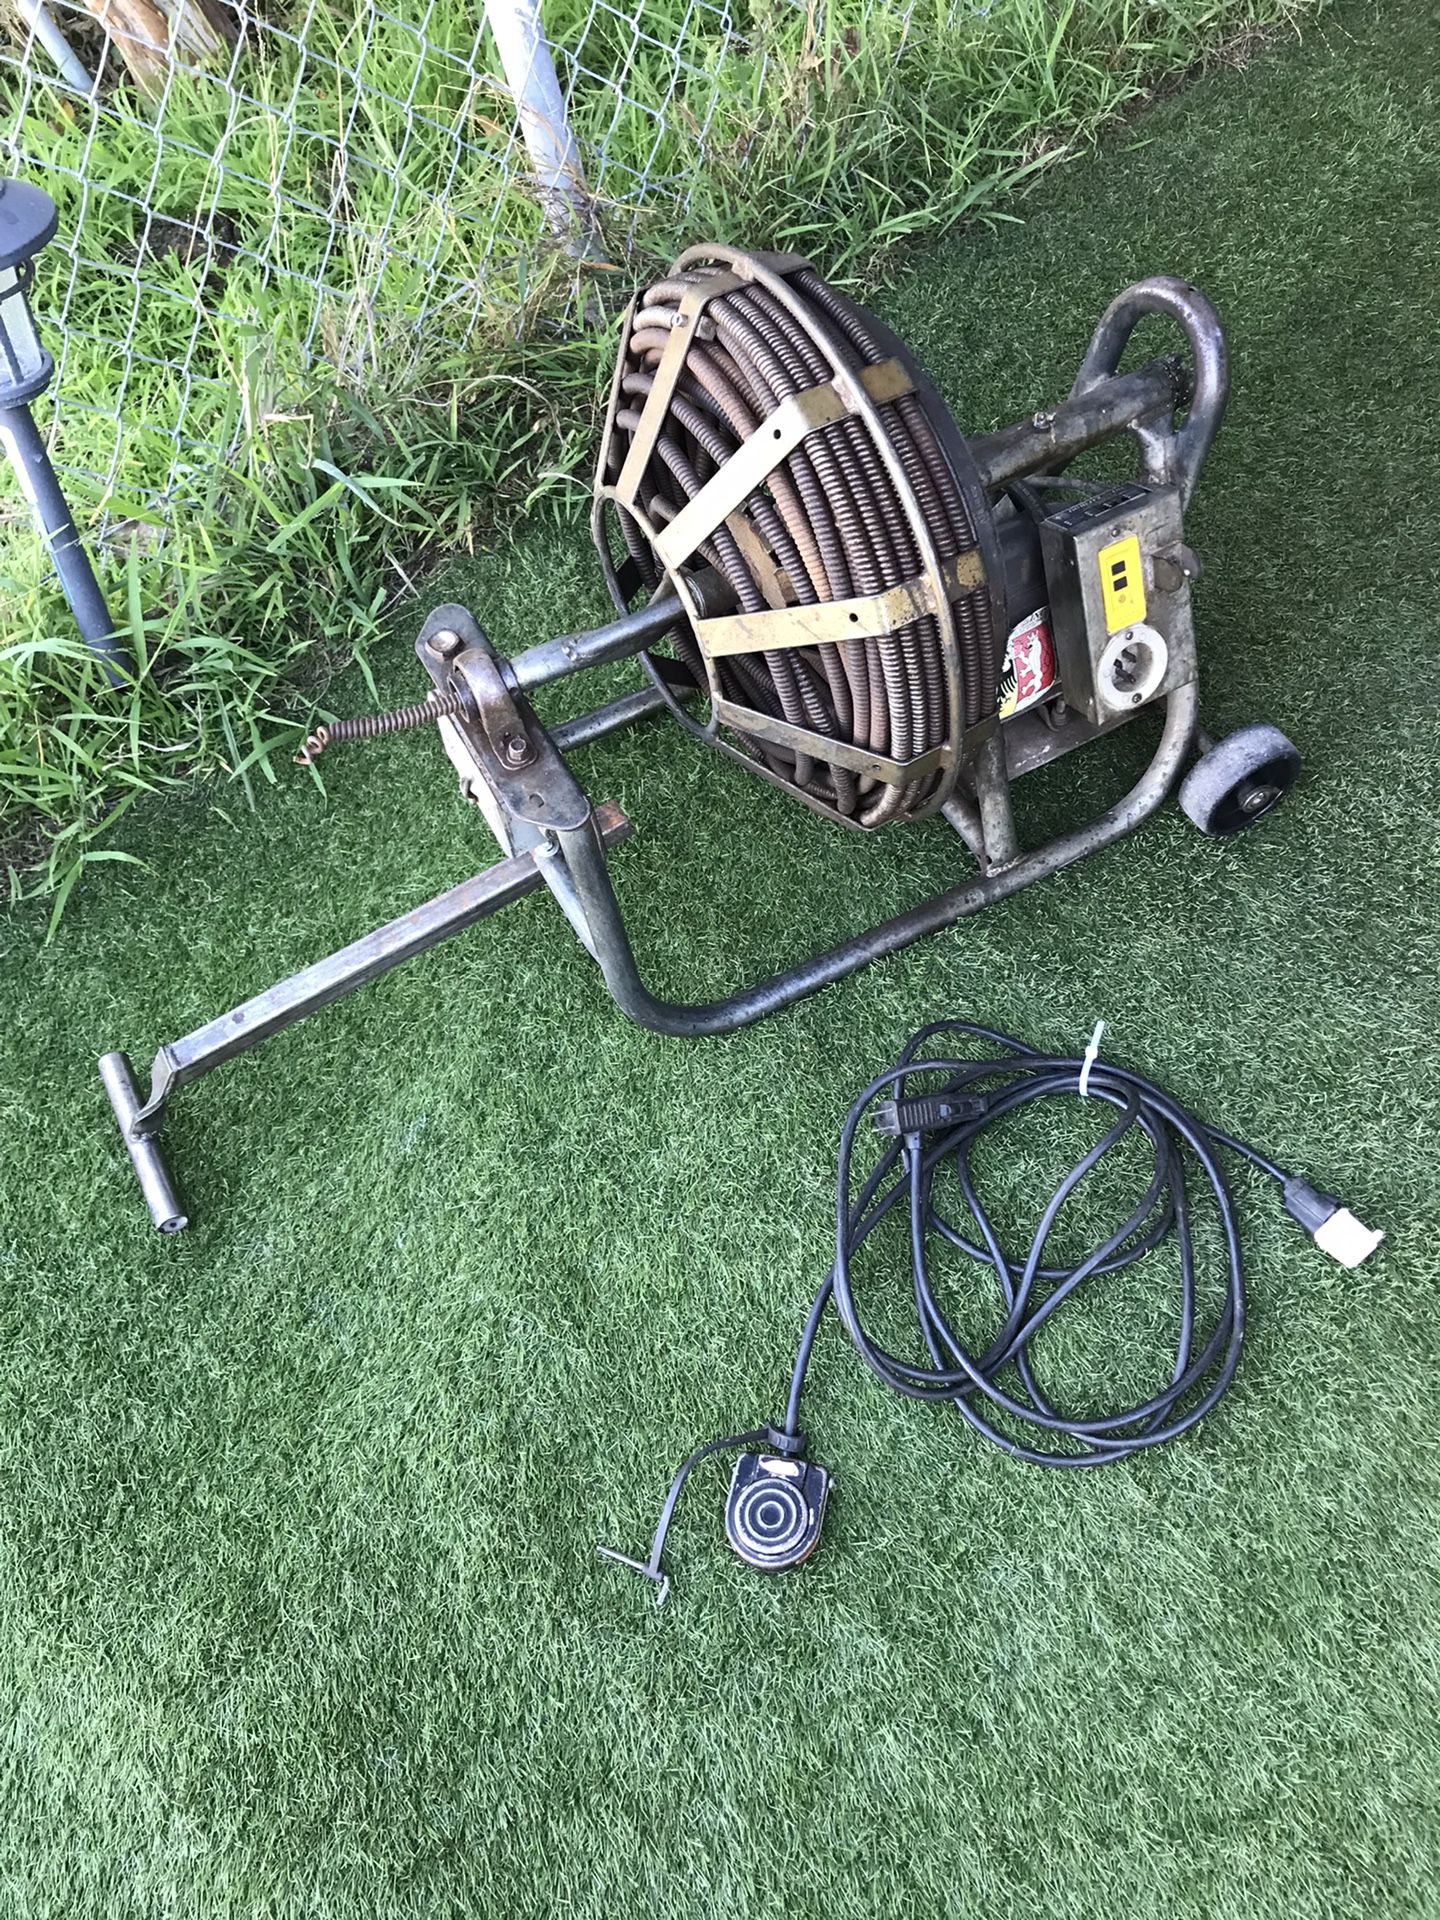 Covra Lx500 Drain Snake Drain Cleaning Unclog Pipe for Sale in Broadview  Heights, OH - OfferUp